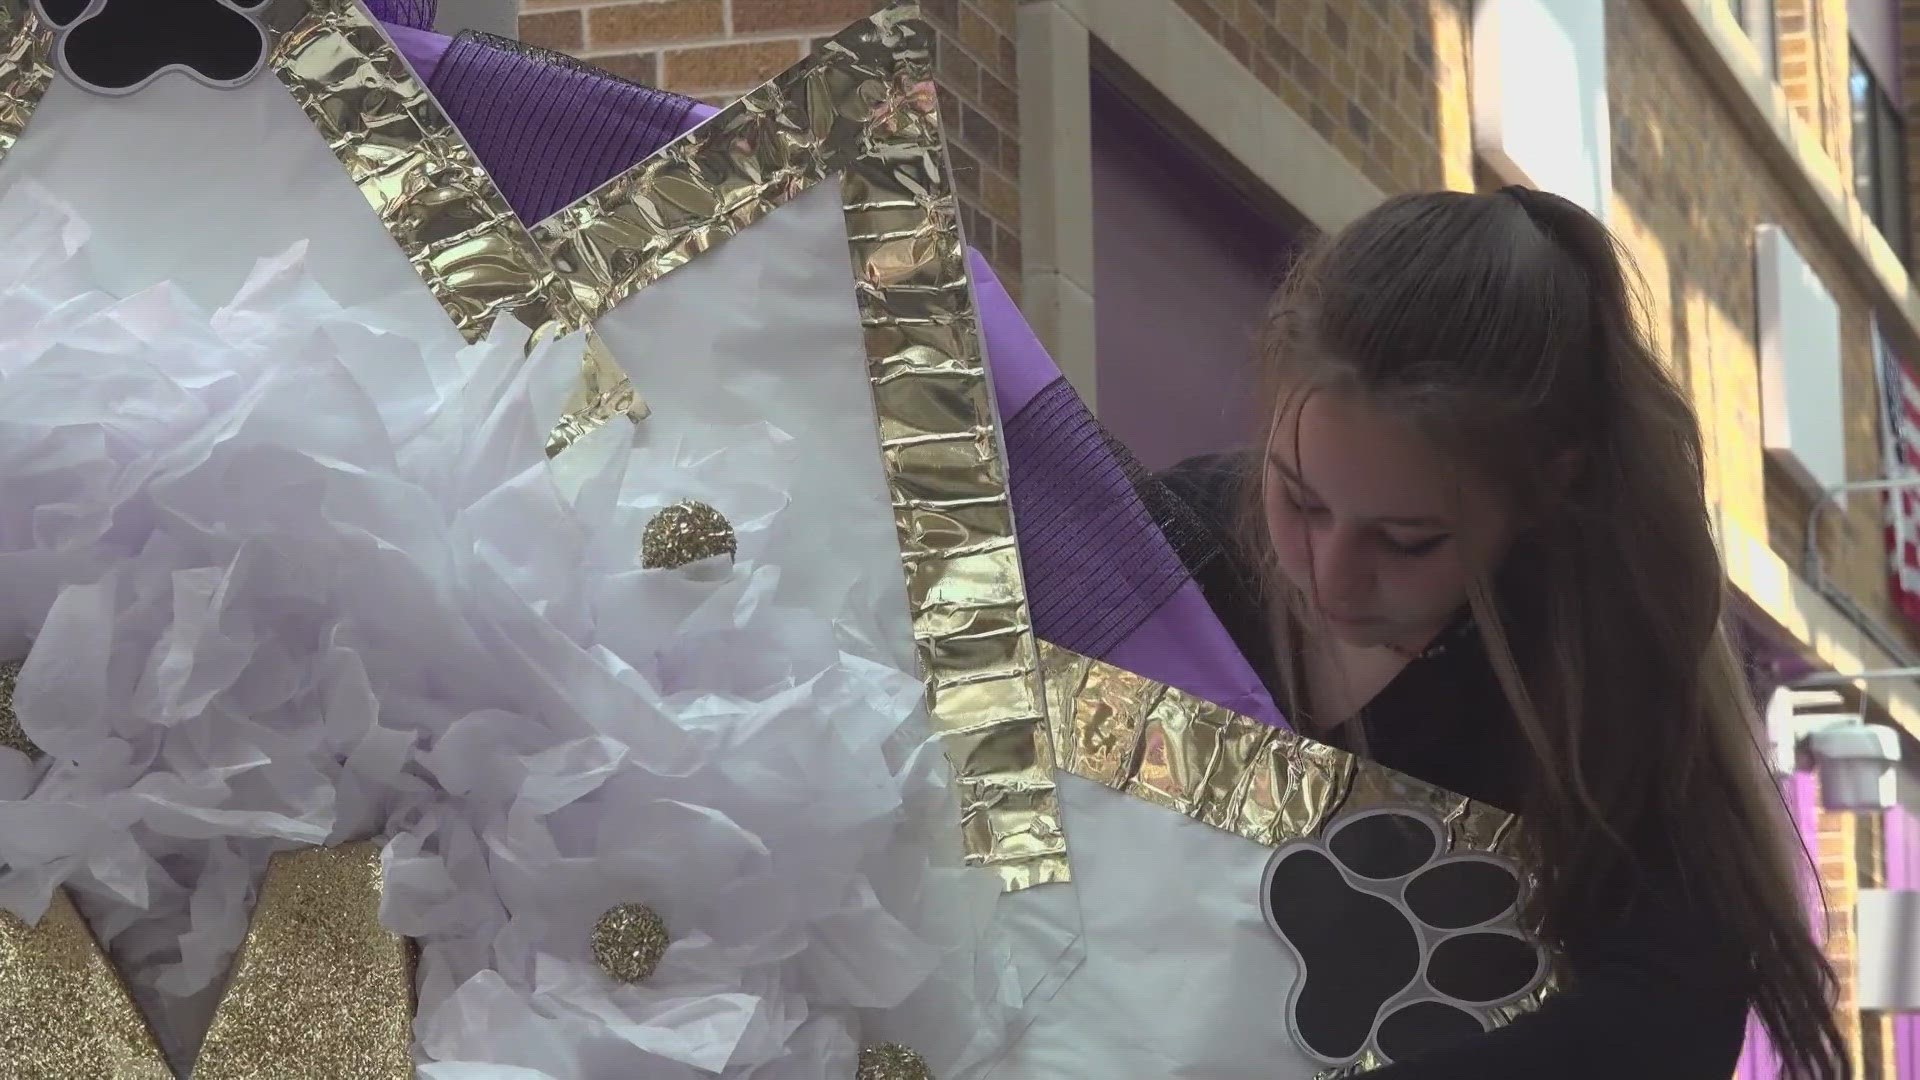 Homecoming season is here, and some Texas students showed their pride with a special mum.